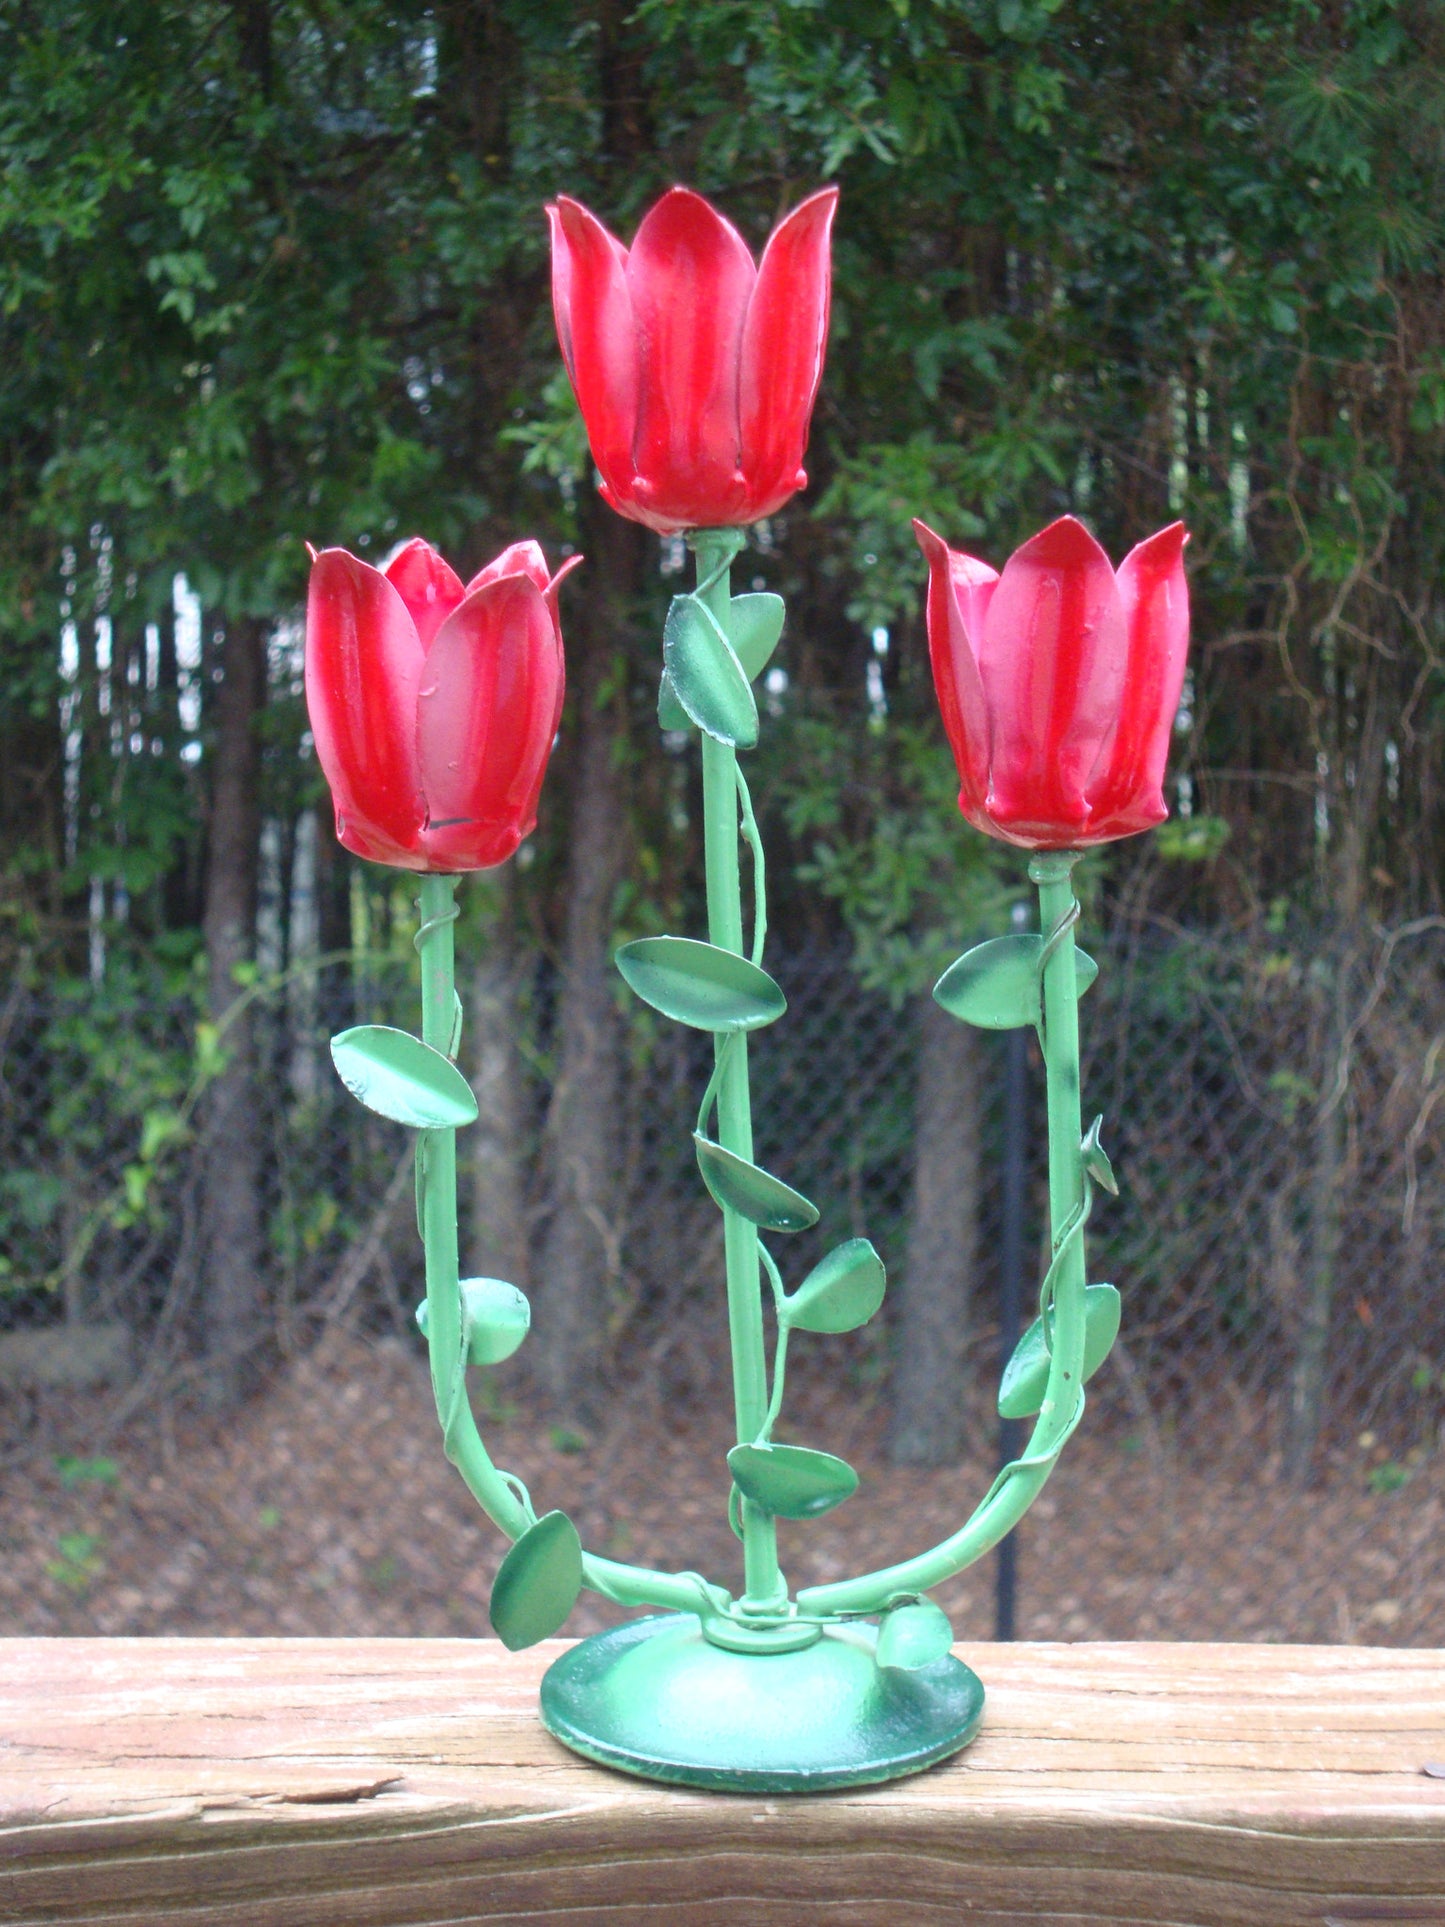 MID CENTURY MODERN JERE VINTAGE METAL SCULPTURE FLORAL RED ROSE CANDLE HOLDER CA Abby Essie